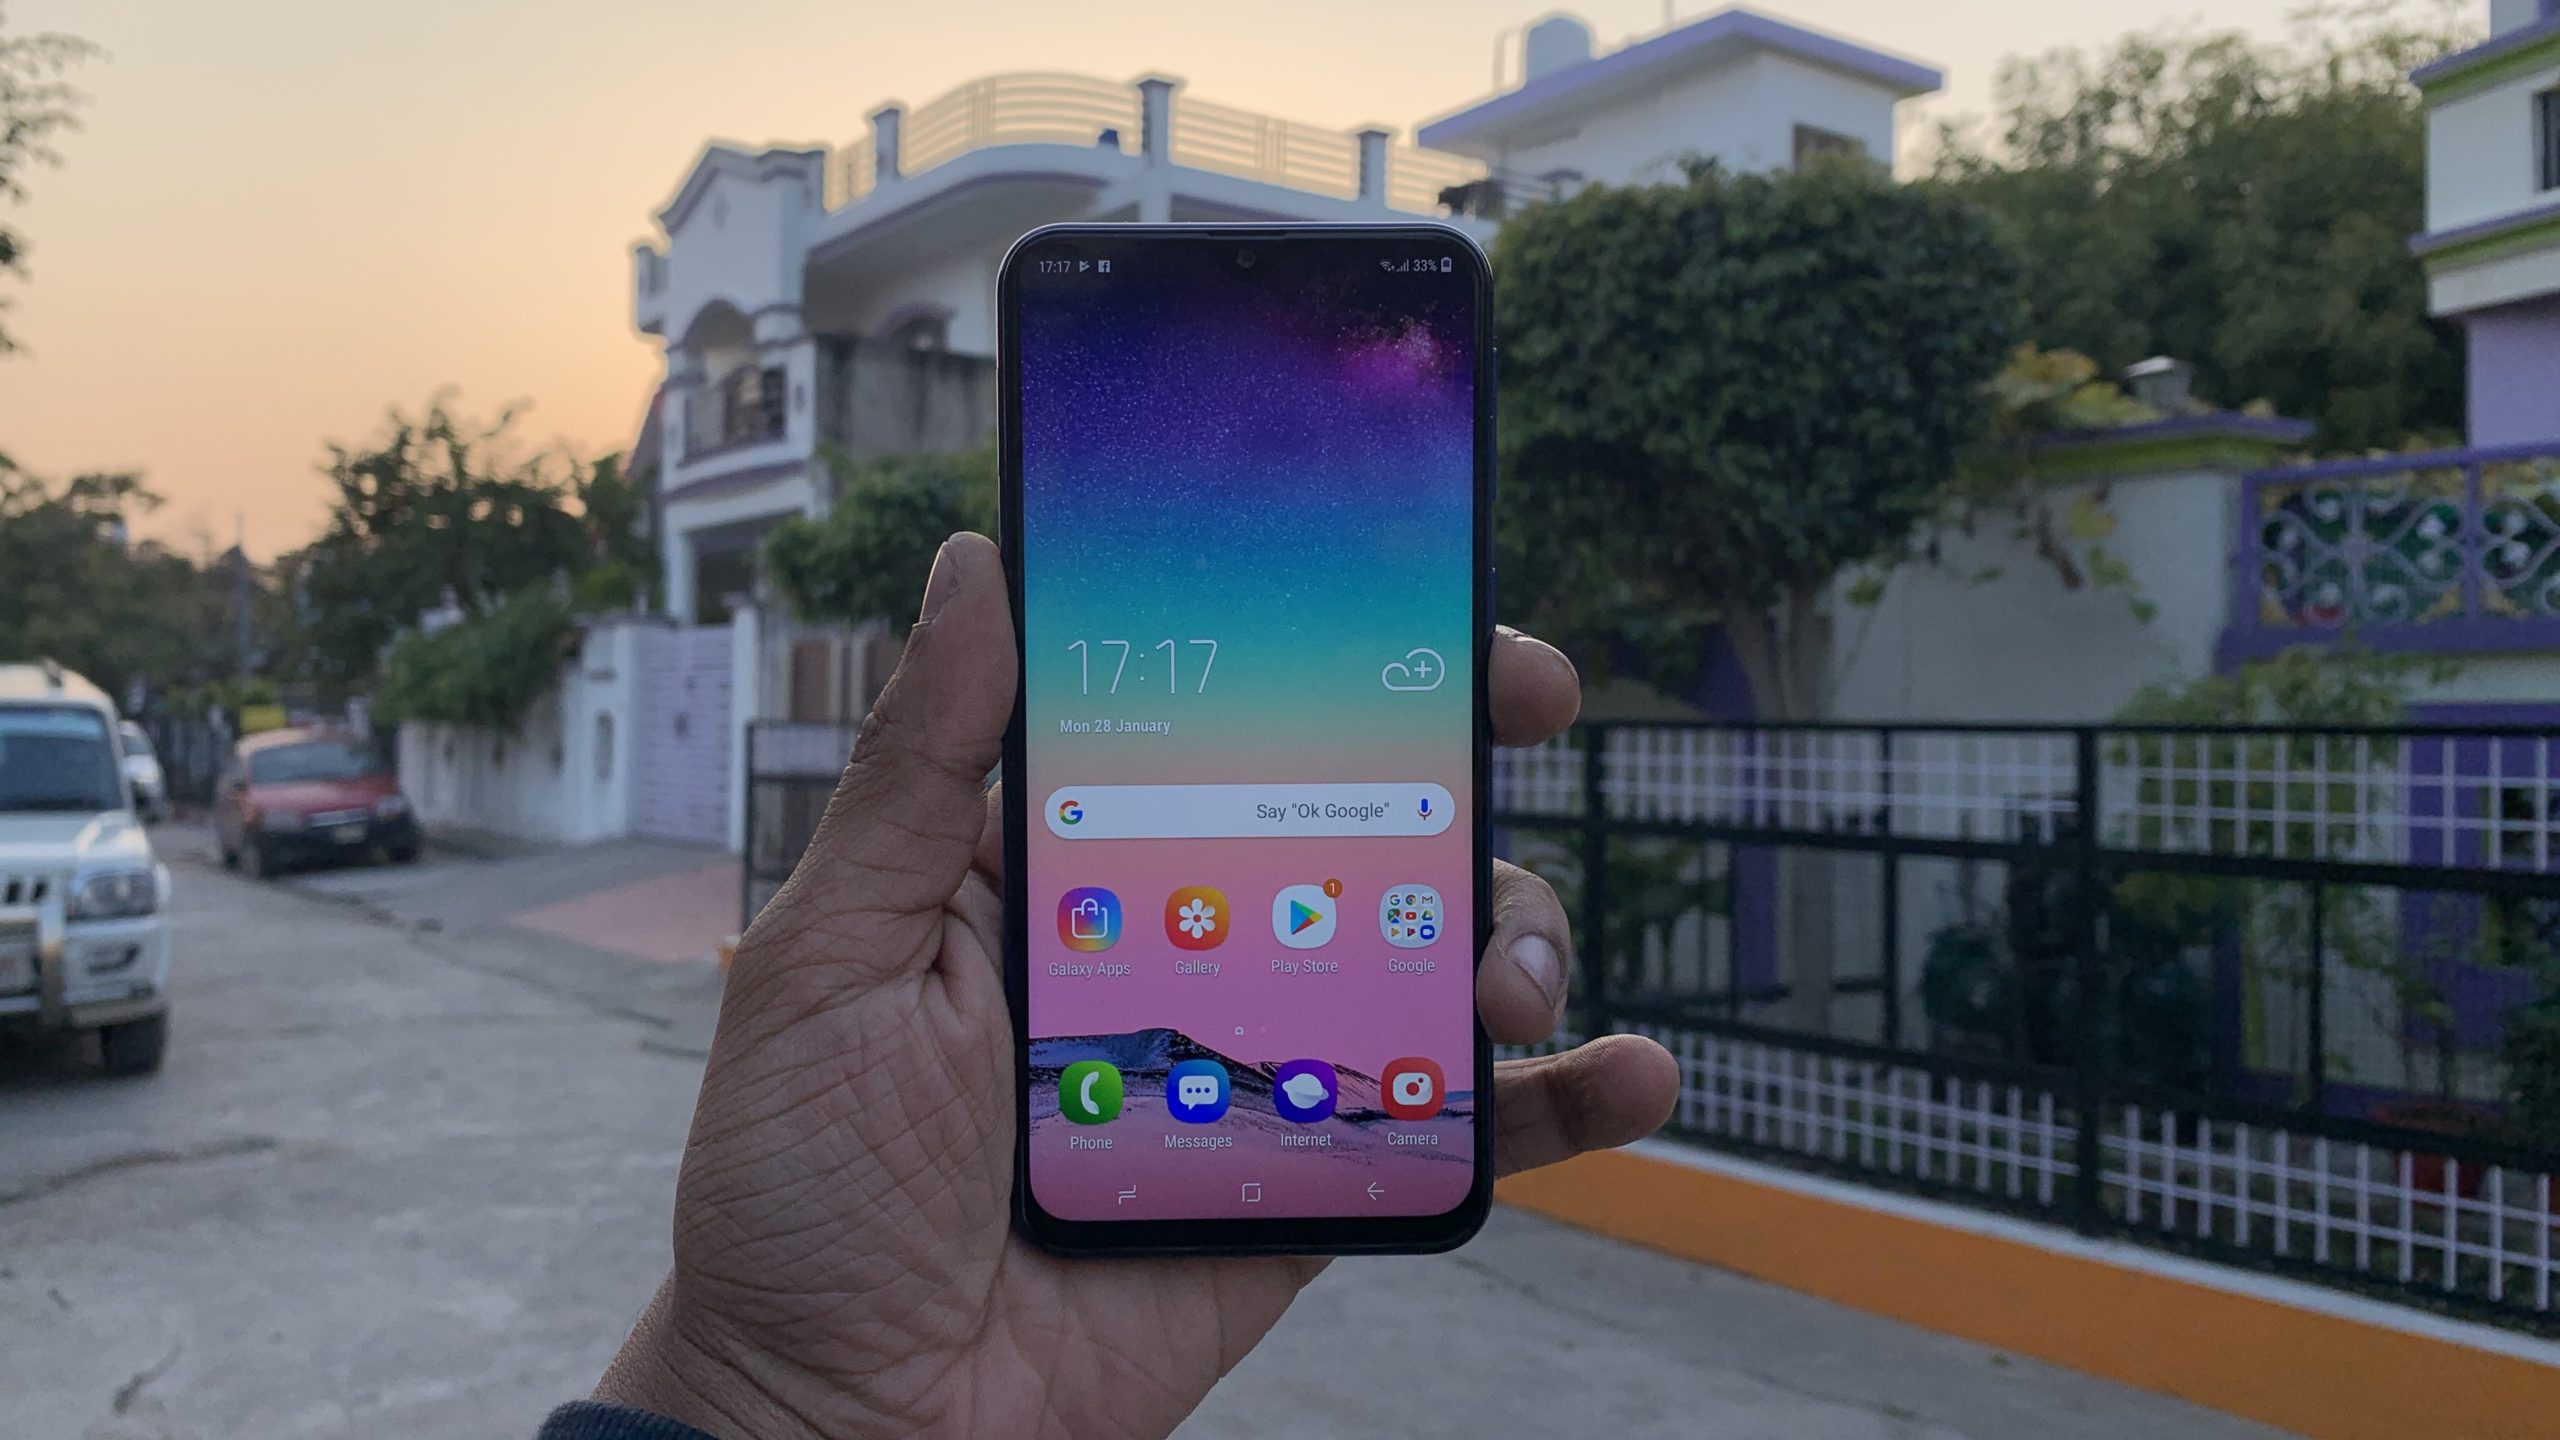 Samsung Galaxy M21 launch in India Expected on 16 March know Expected Features, Specifications, Upcoming Smartphones 2020 सैमसंग गैलेक्सी एम21 लॉन्च डेट और कीमत